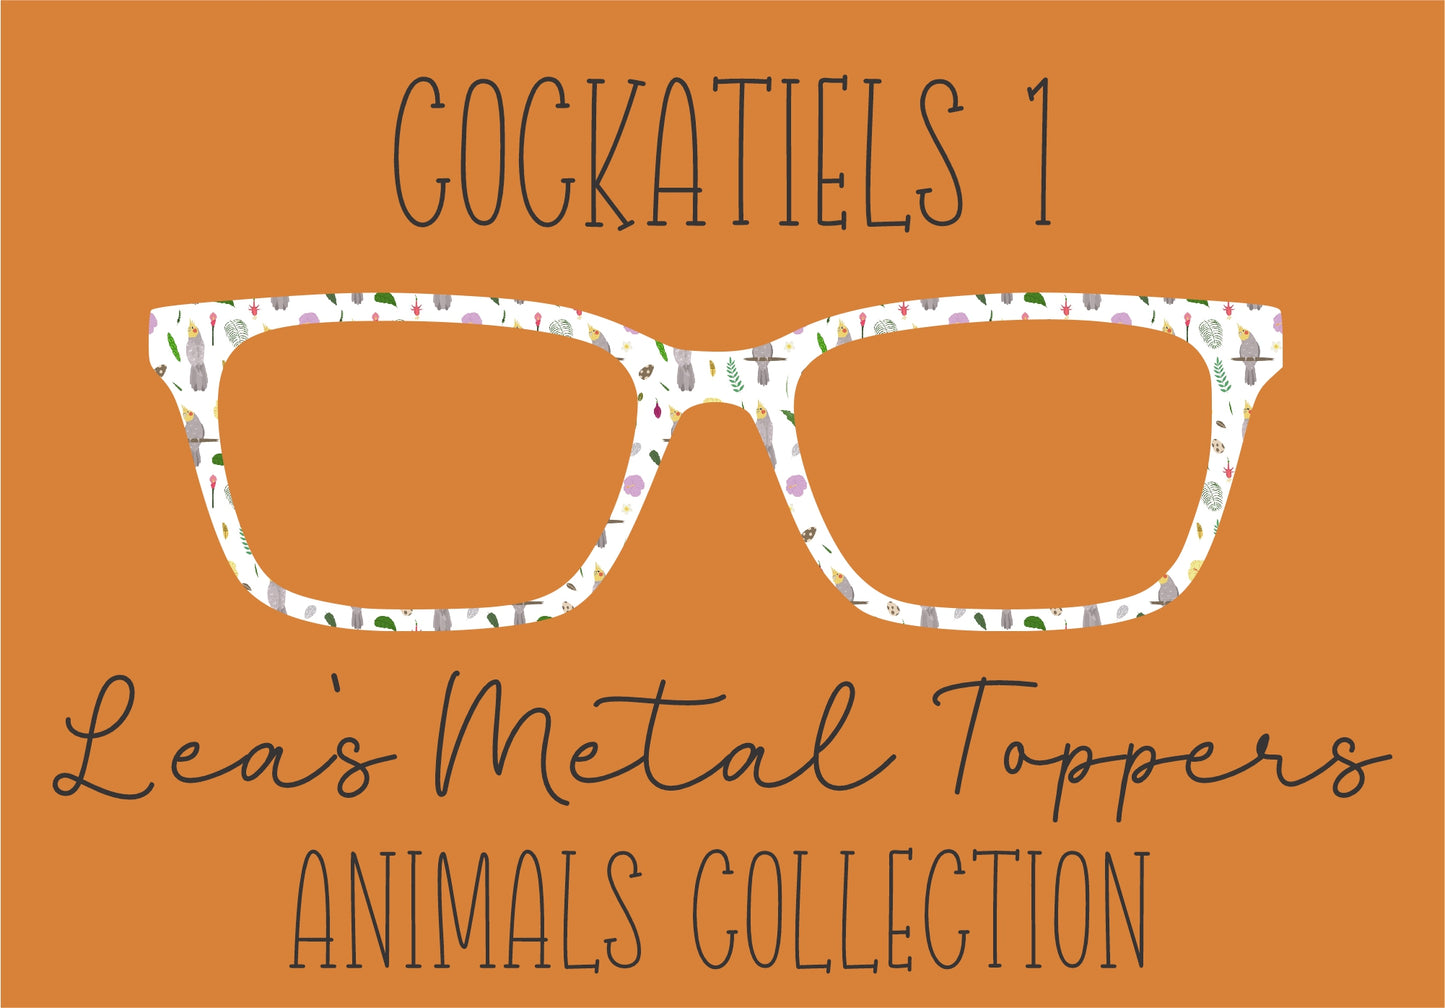 COCKATIELS 1 Eyewear Frame Toppers COMES WITH MAGNETS